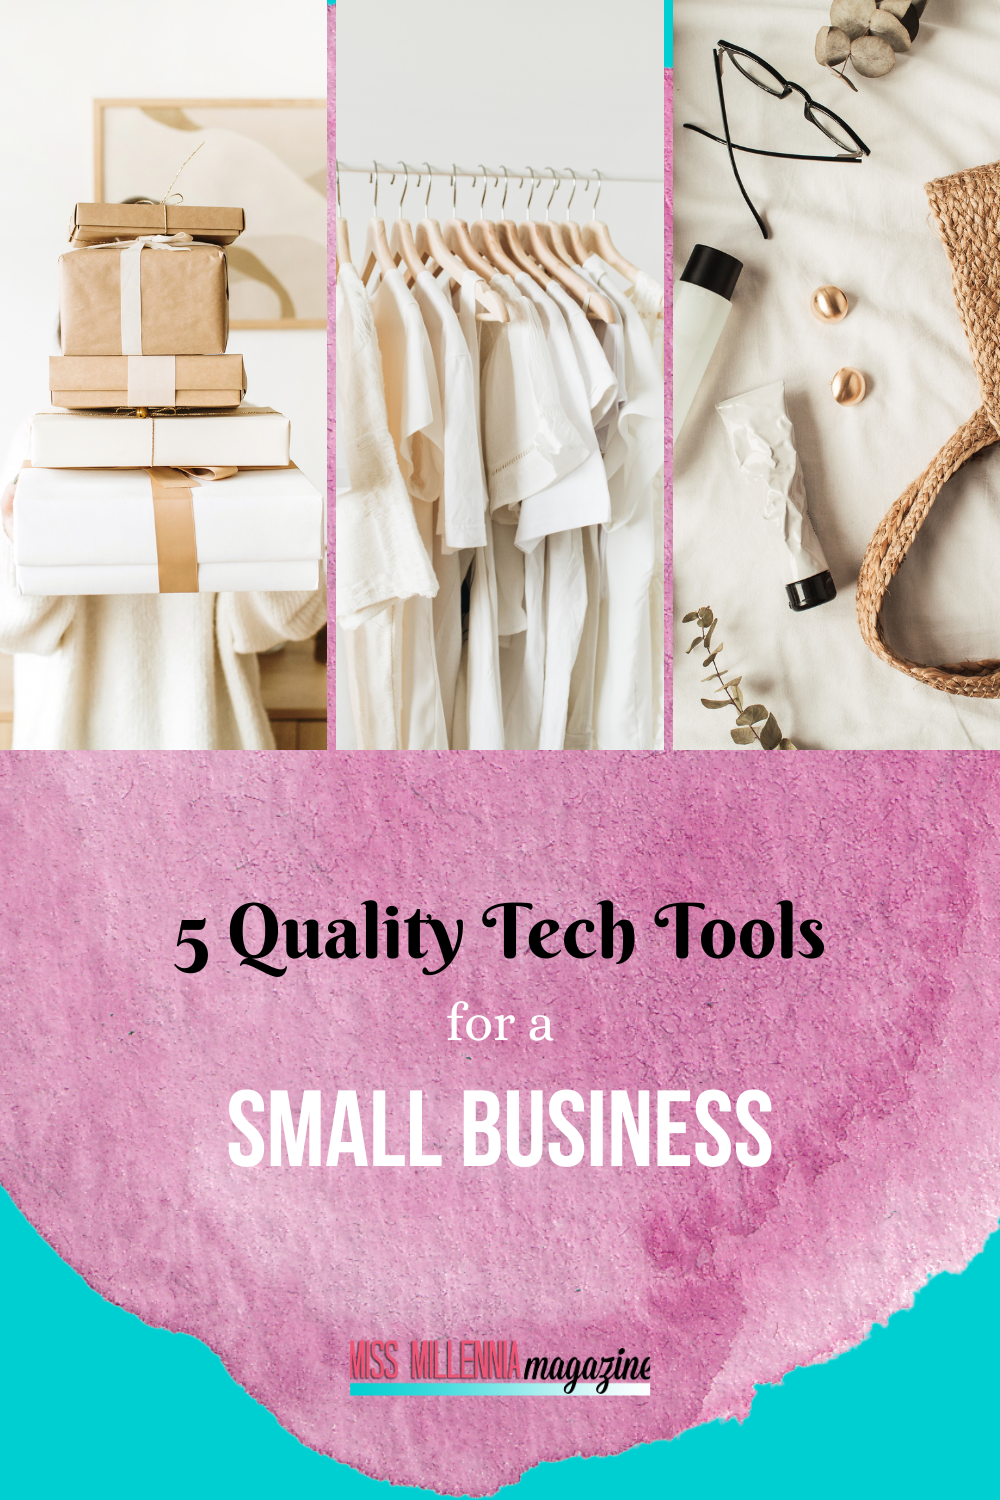 5 Quality Tech Tools for a Small Business